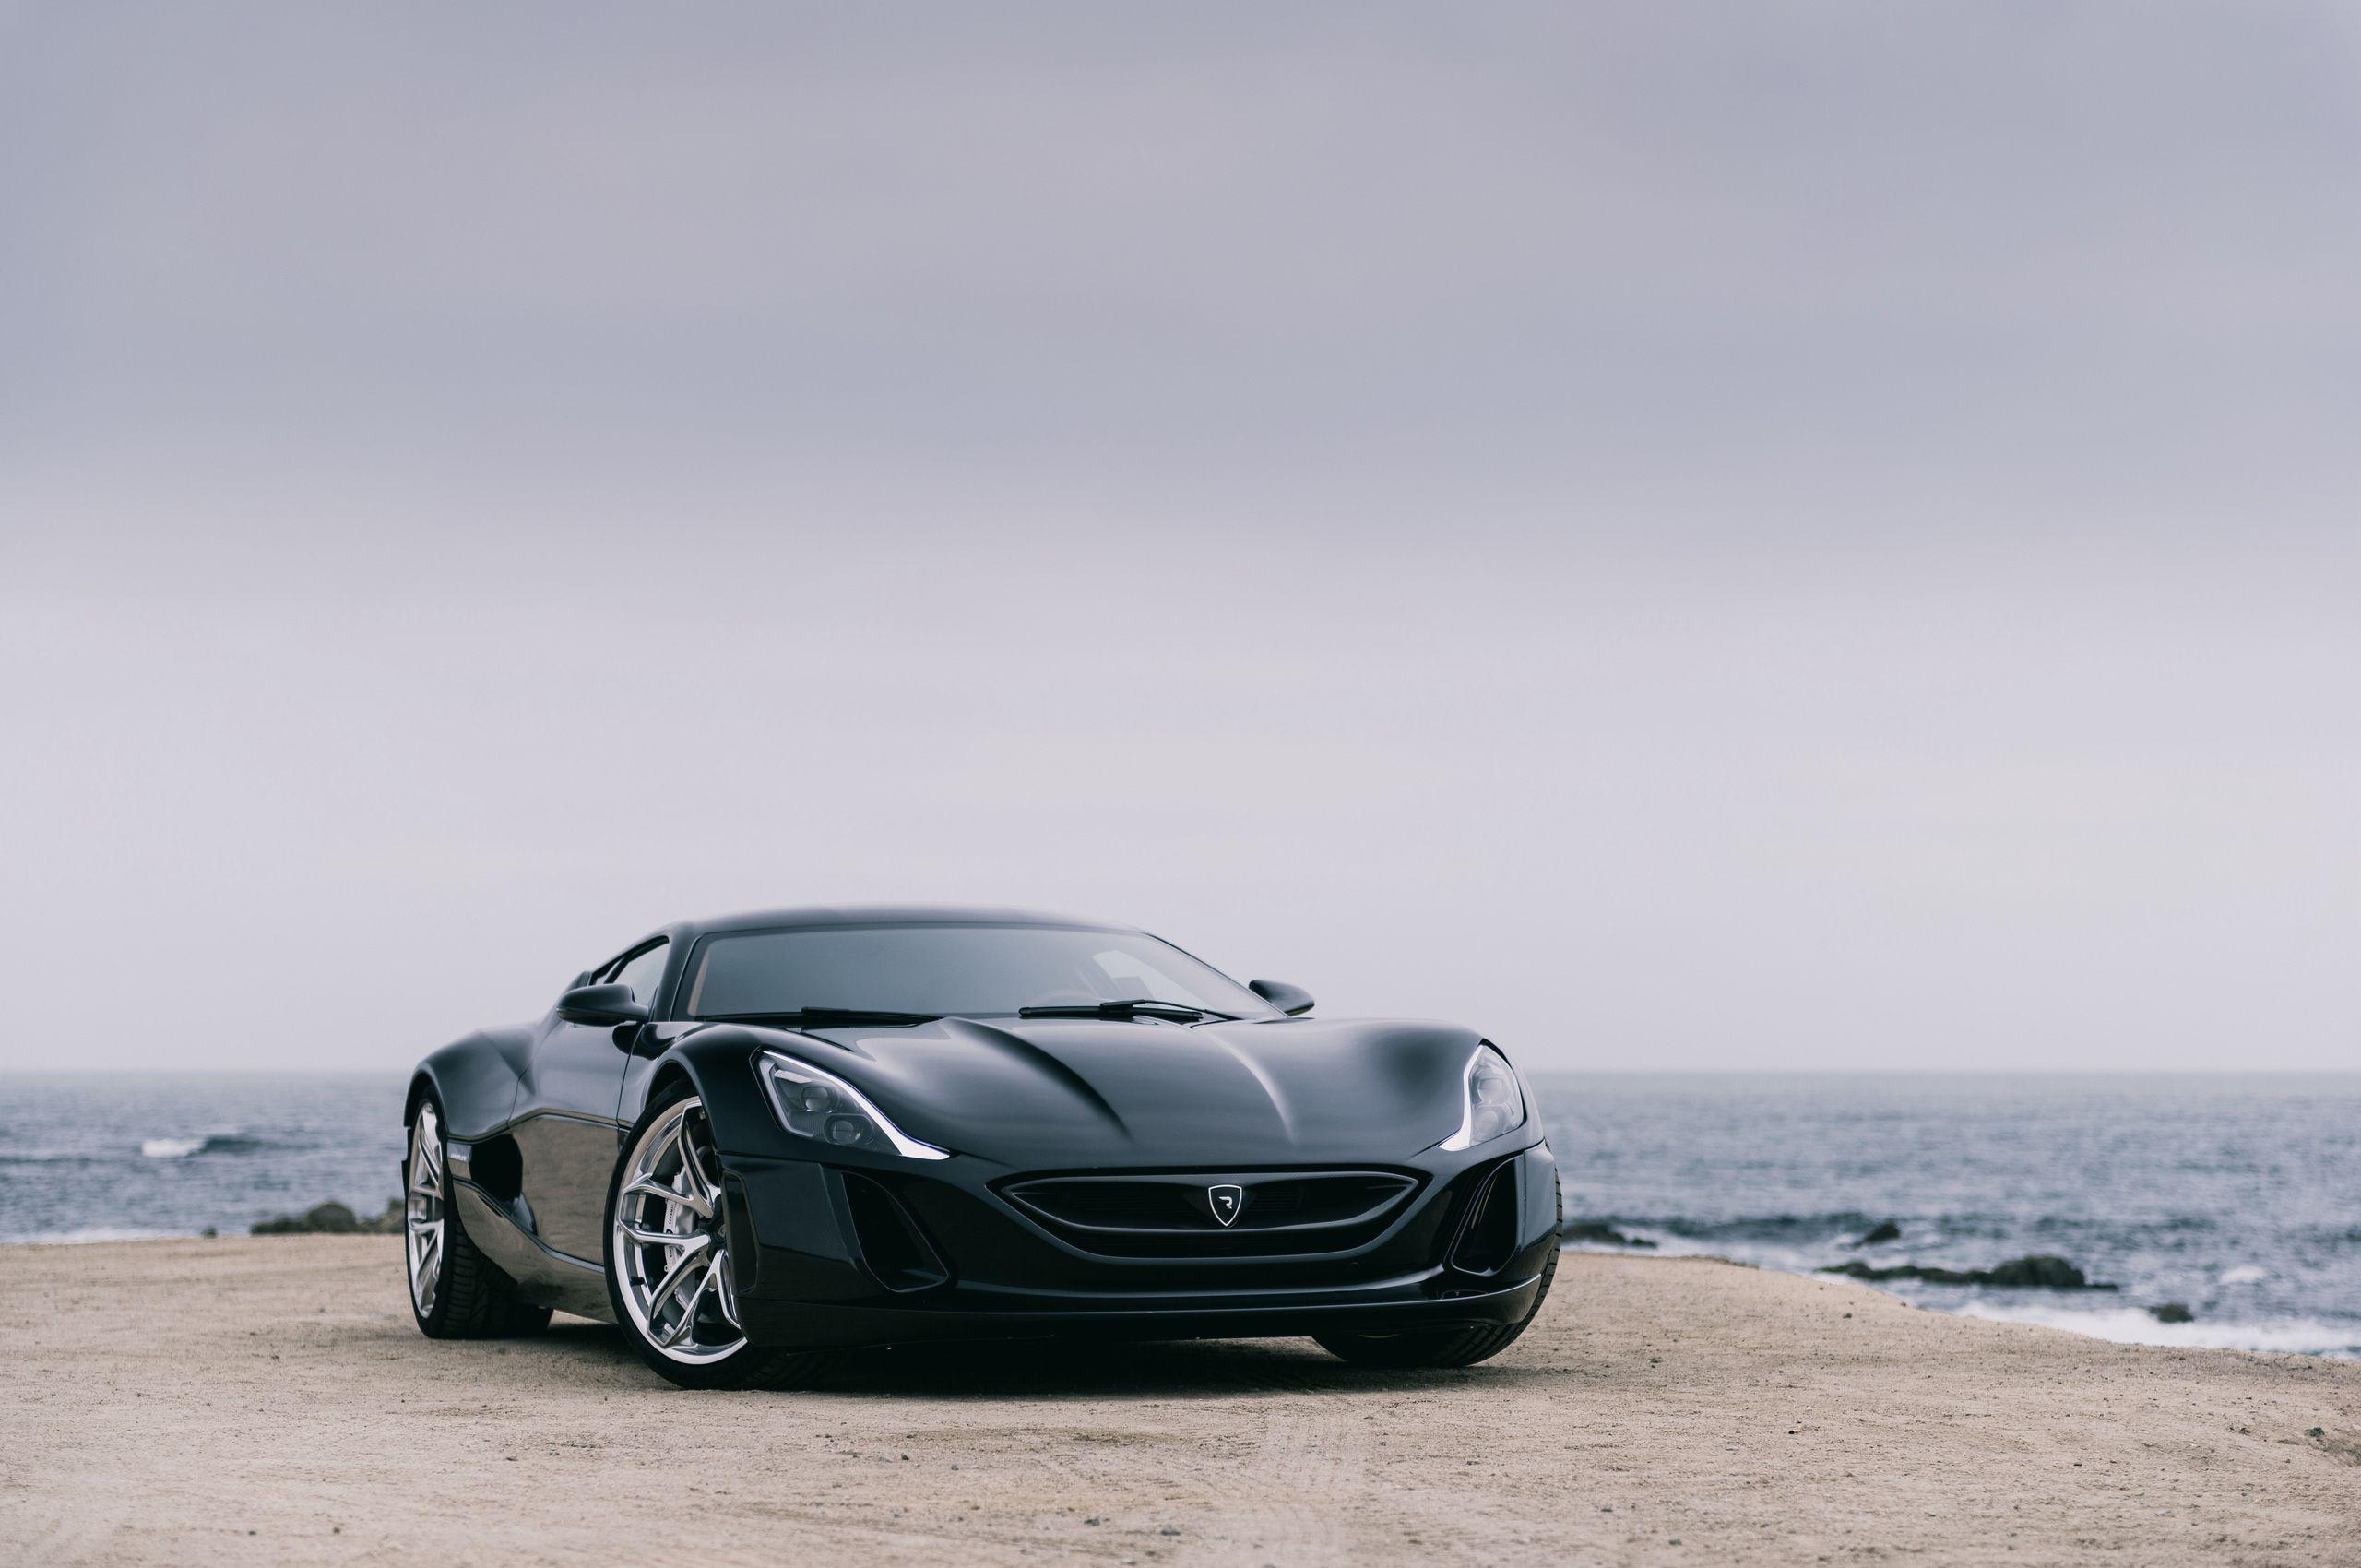 Rimac Nevera electric hypercar sets 23 records in single day